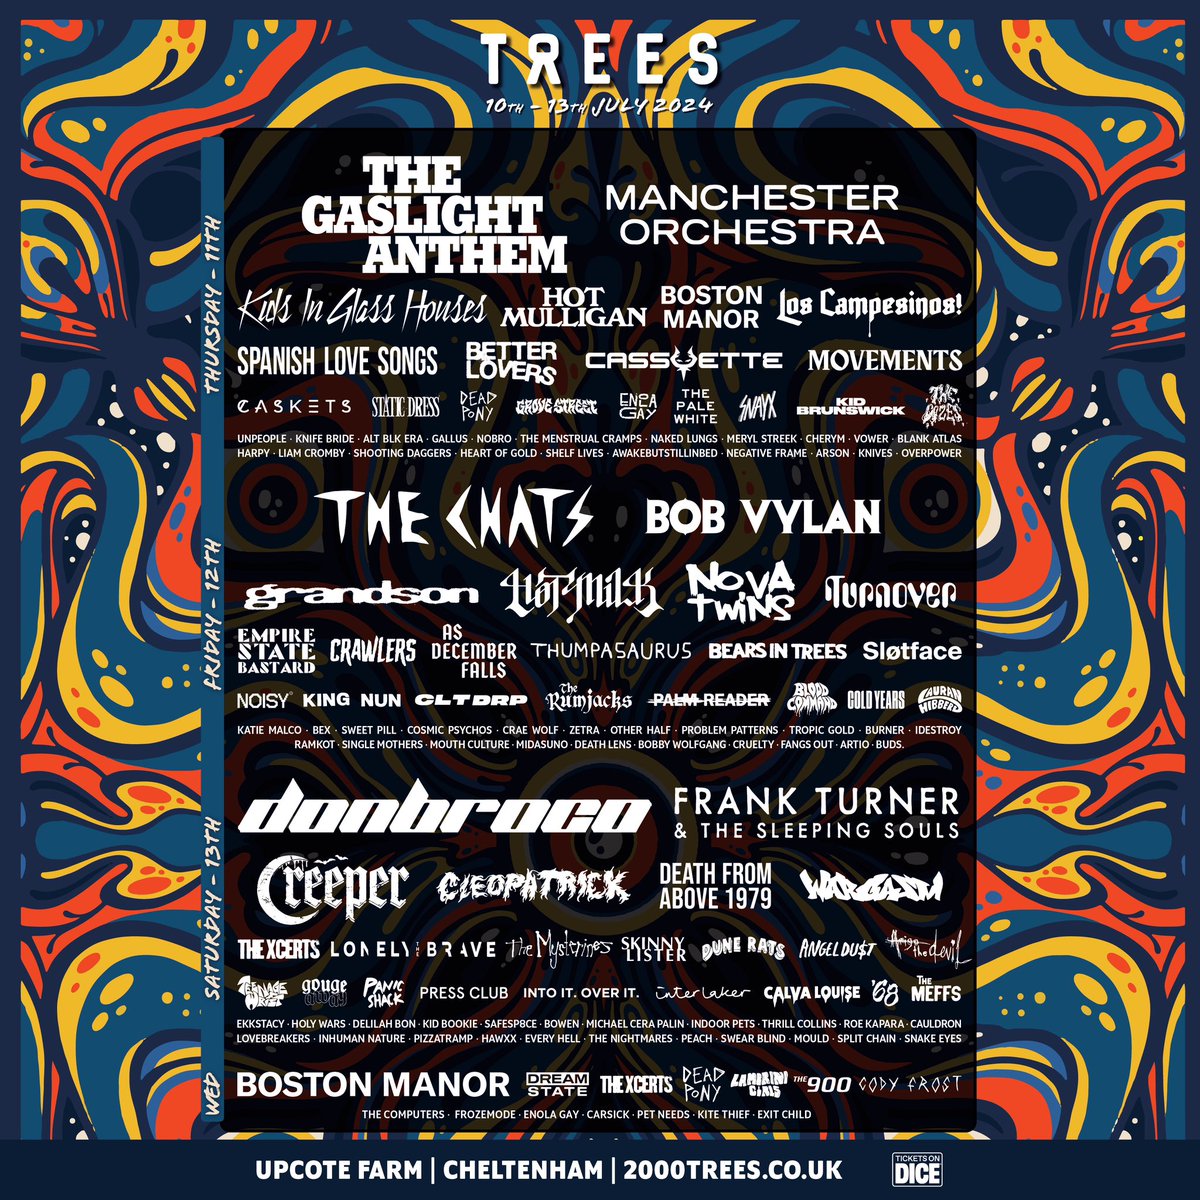 Two free weekend tickets to see us at @2000trees in July? Not too shabby! Use code BAND50 to get €50 off of weekend tickets (if you win, they'll refund your ticket). Enter by May 15th 2000trees.co.uk/landing/BANDCO…